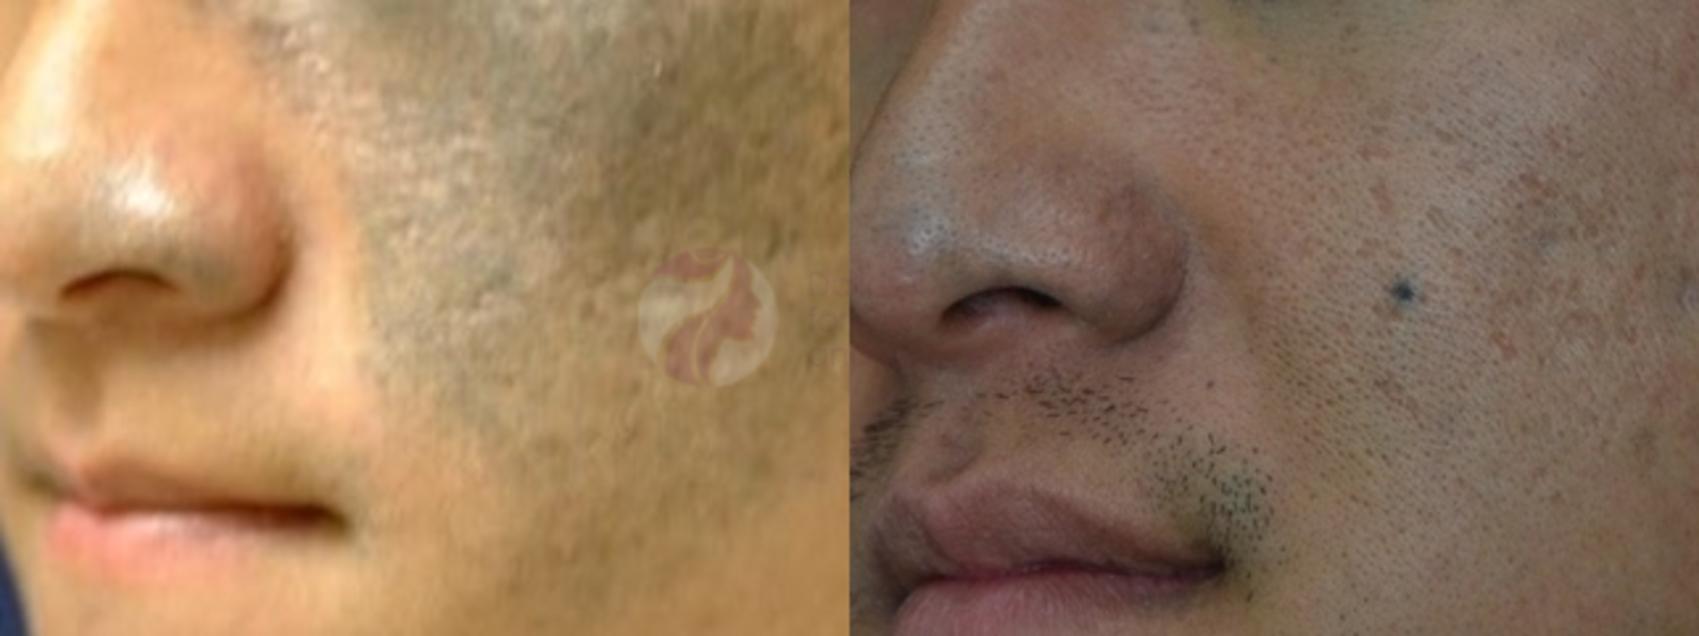 Laser Pigment & Tattoo Removal Before and After Photo Gallery | Dallas, TX  | Dallas Center for Dermatology and Aesthetics